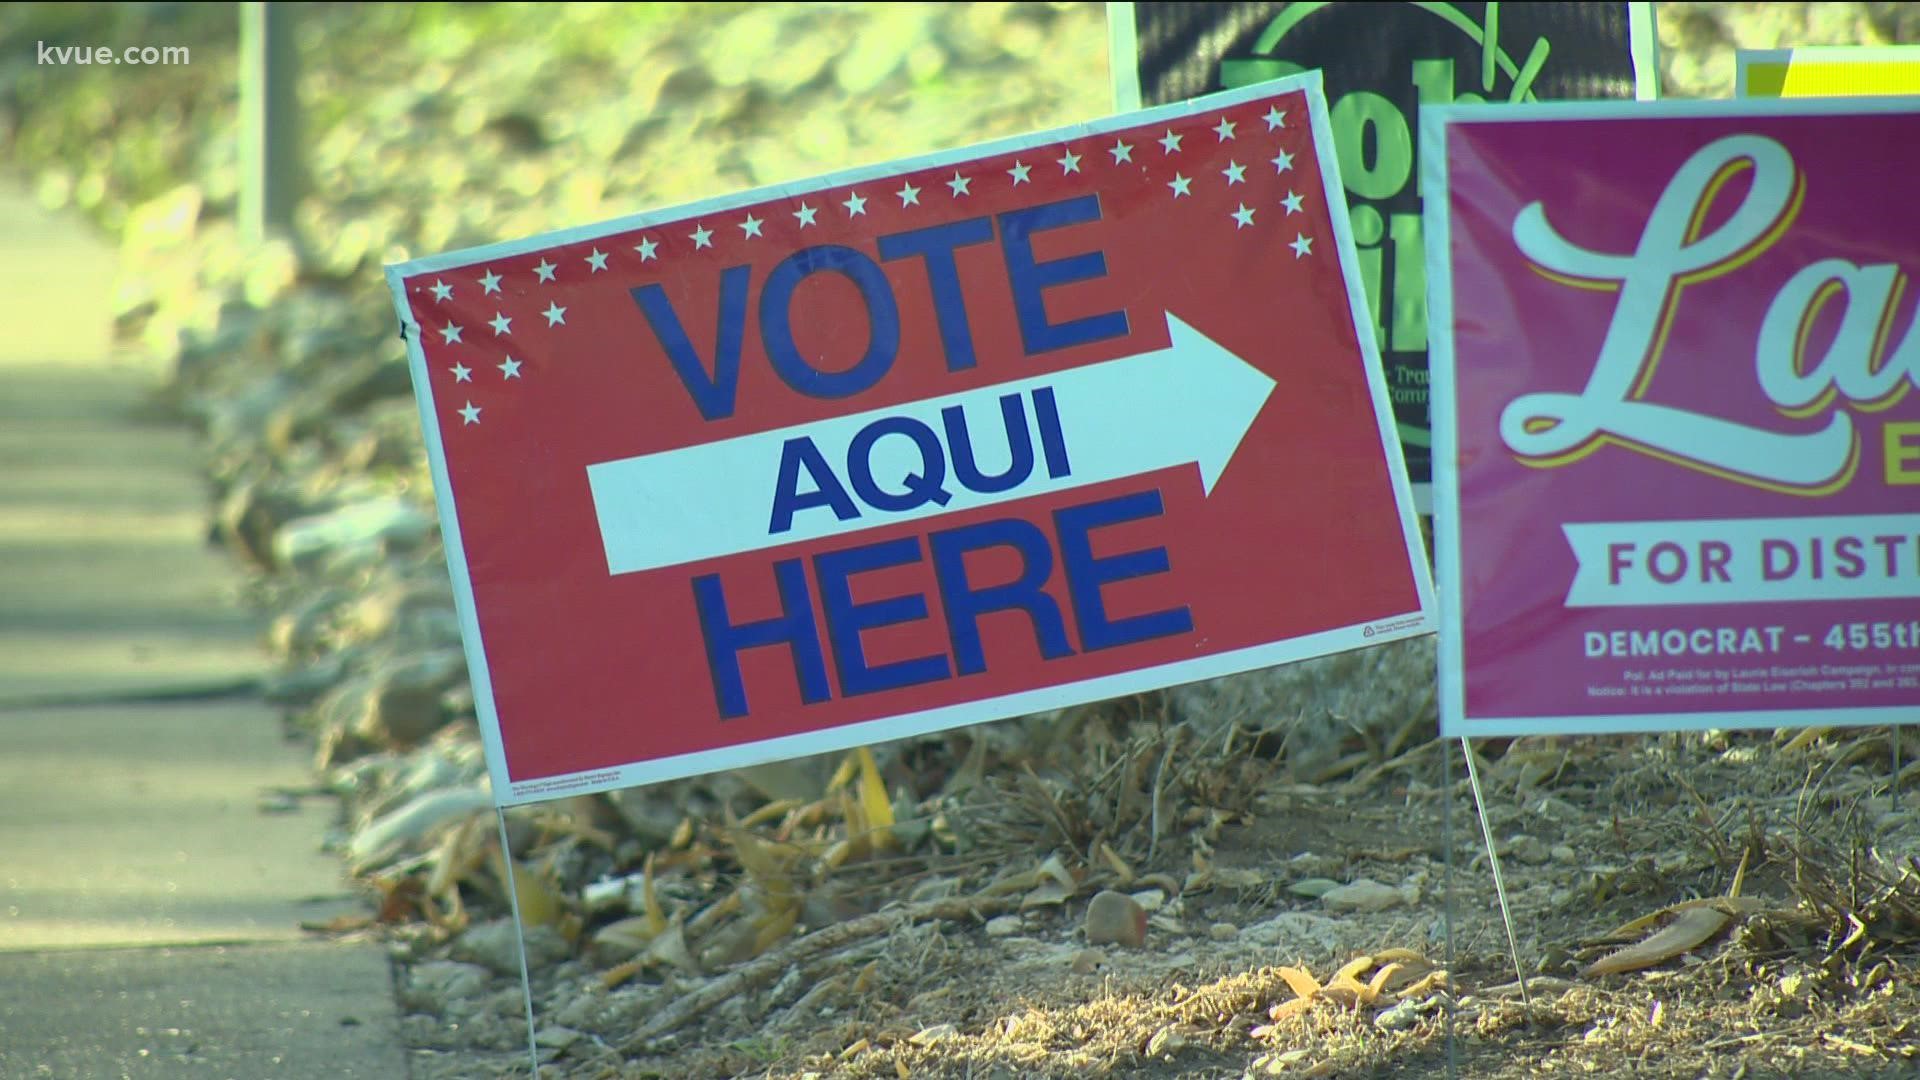 The U.S. Department of Justice and Travis County have reached an agreement that will make polling places more accessible.